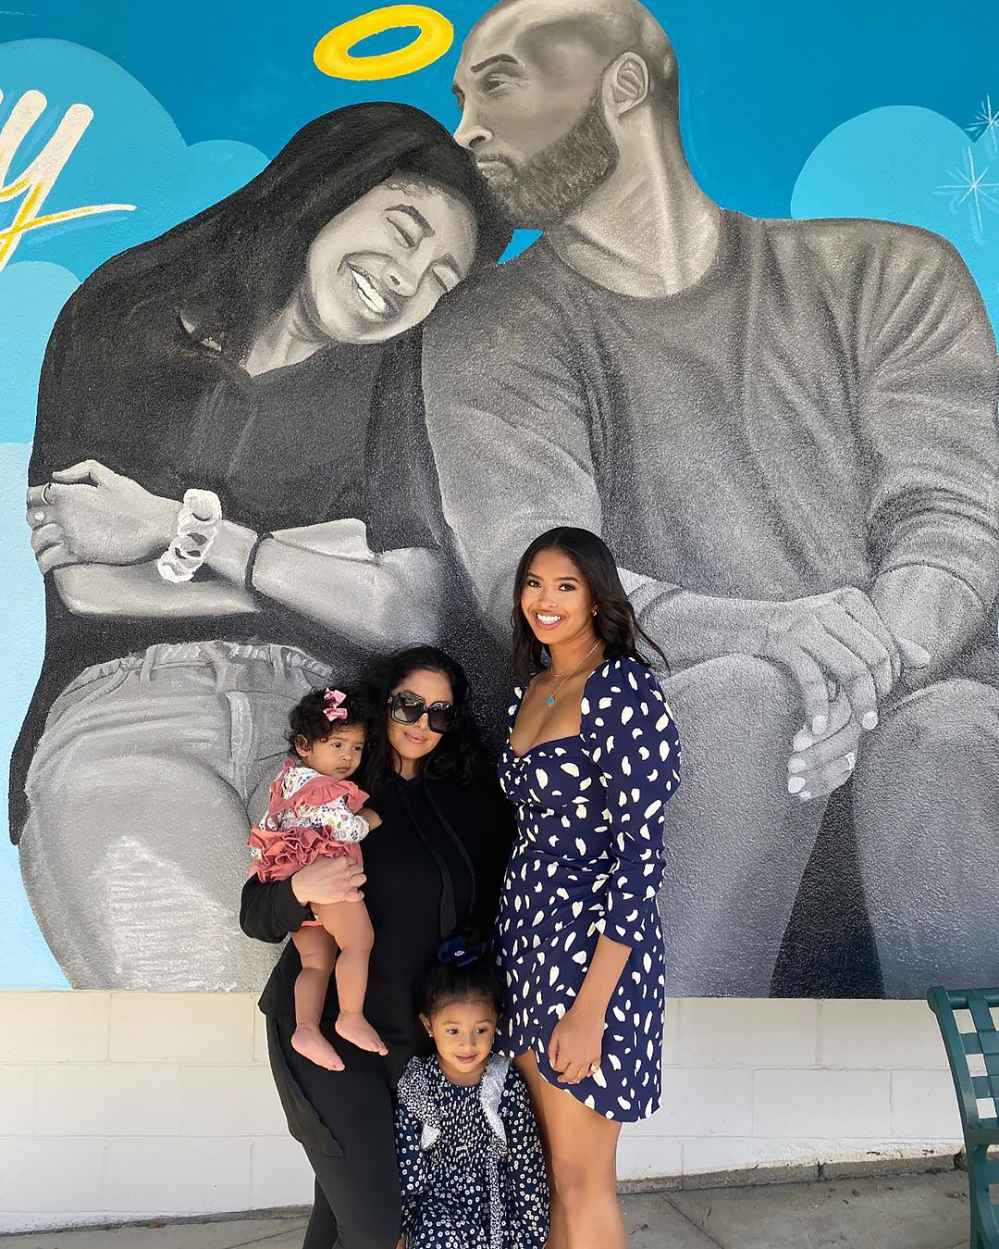 Vanessa Bryant Shares Photos With 3 Daughters in Easter Best Following Kobe Gianna deaths